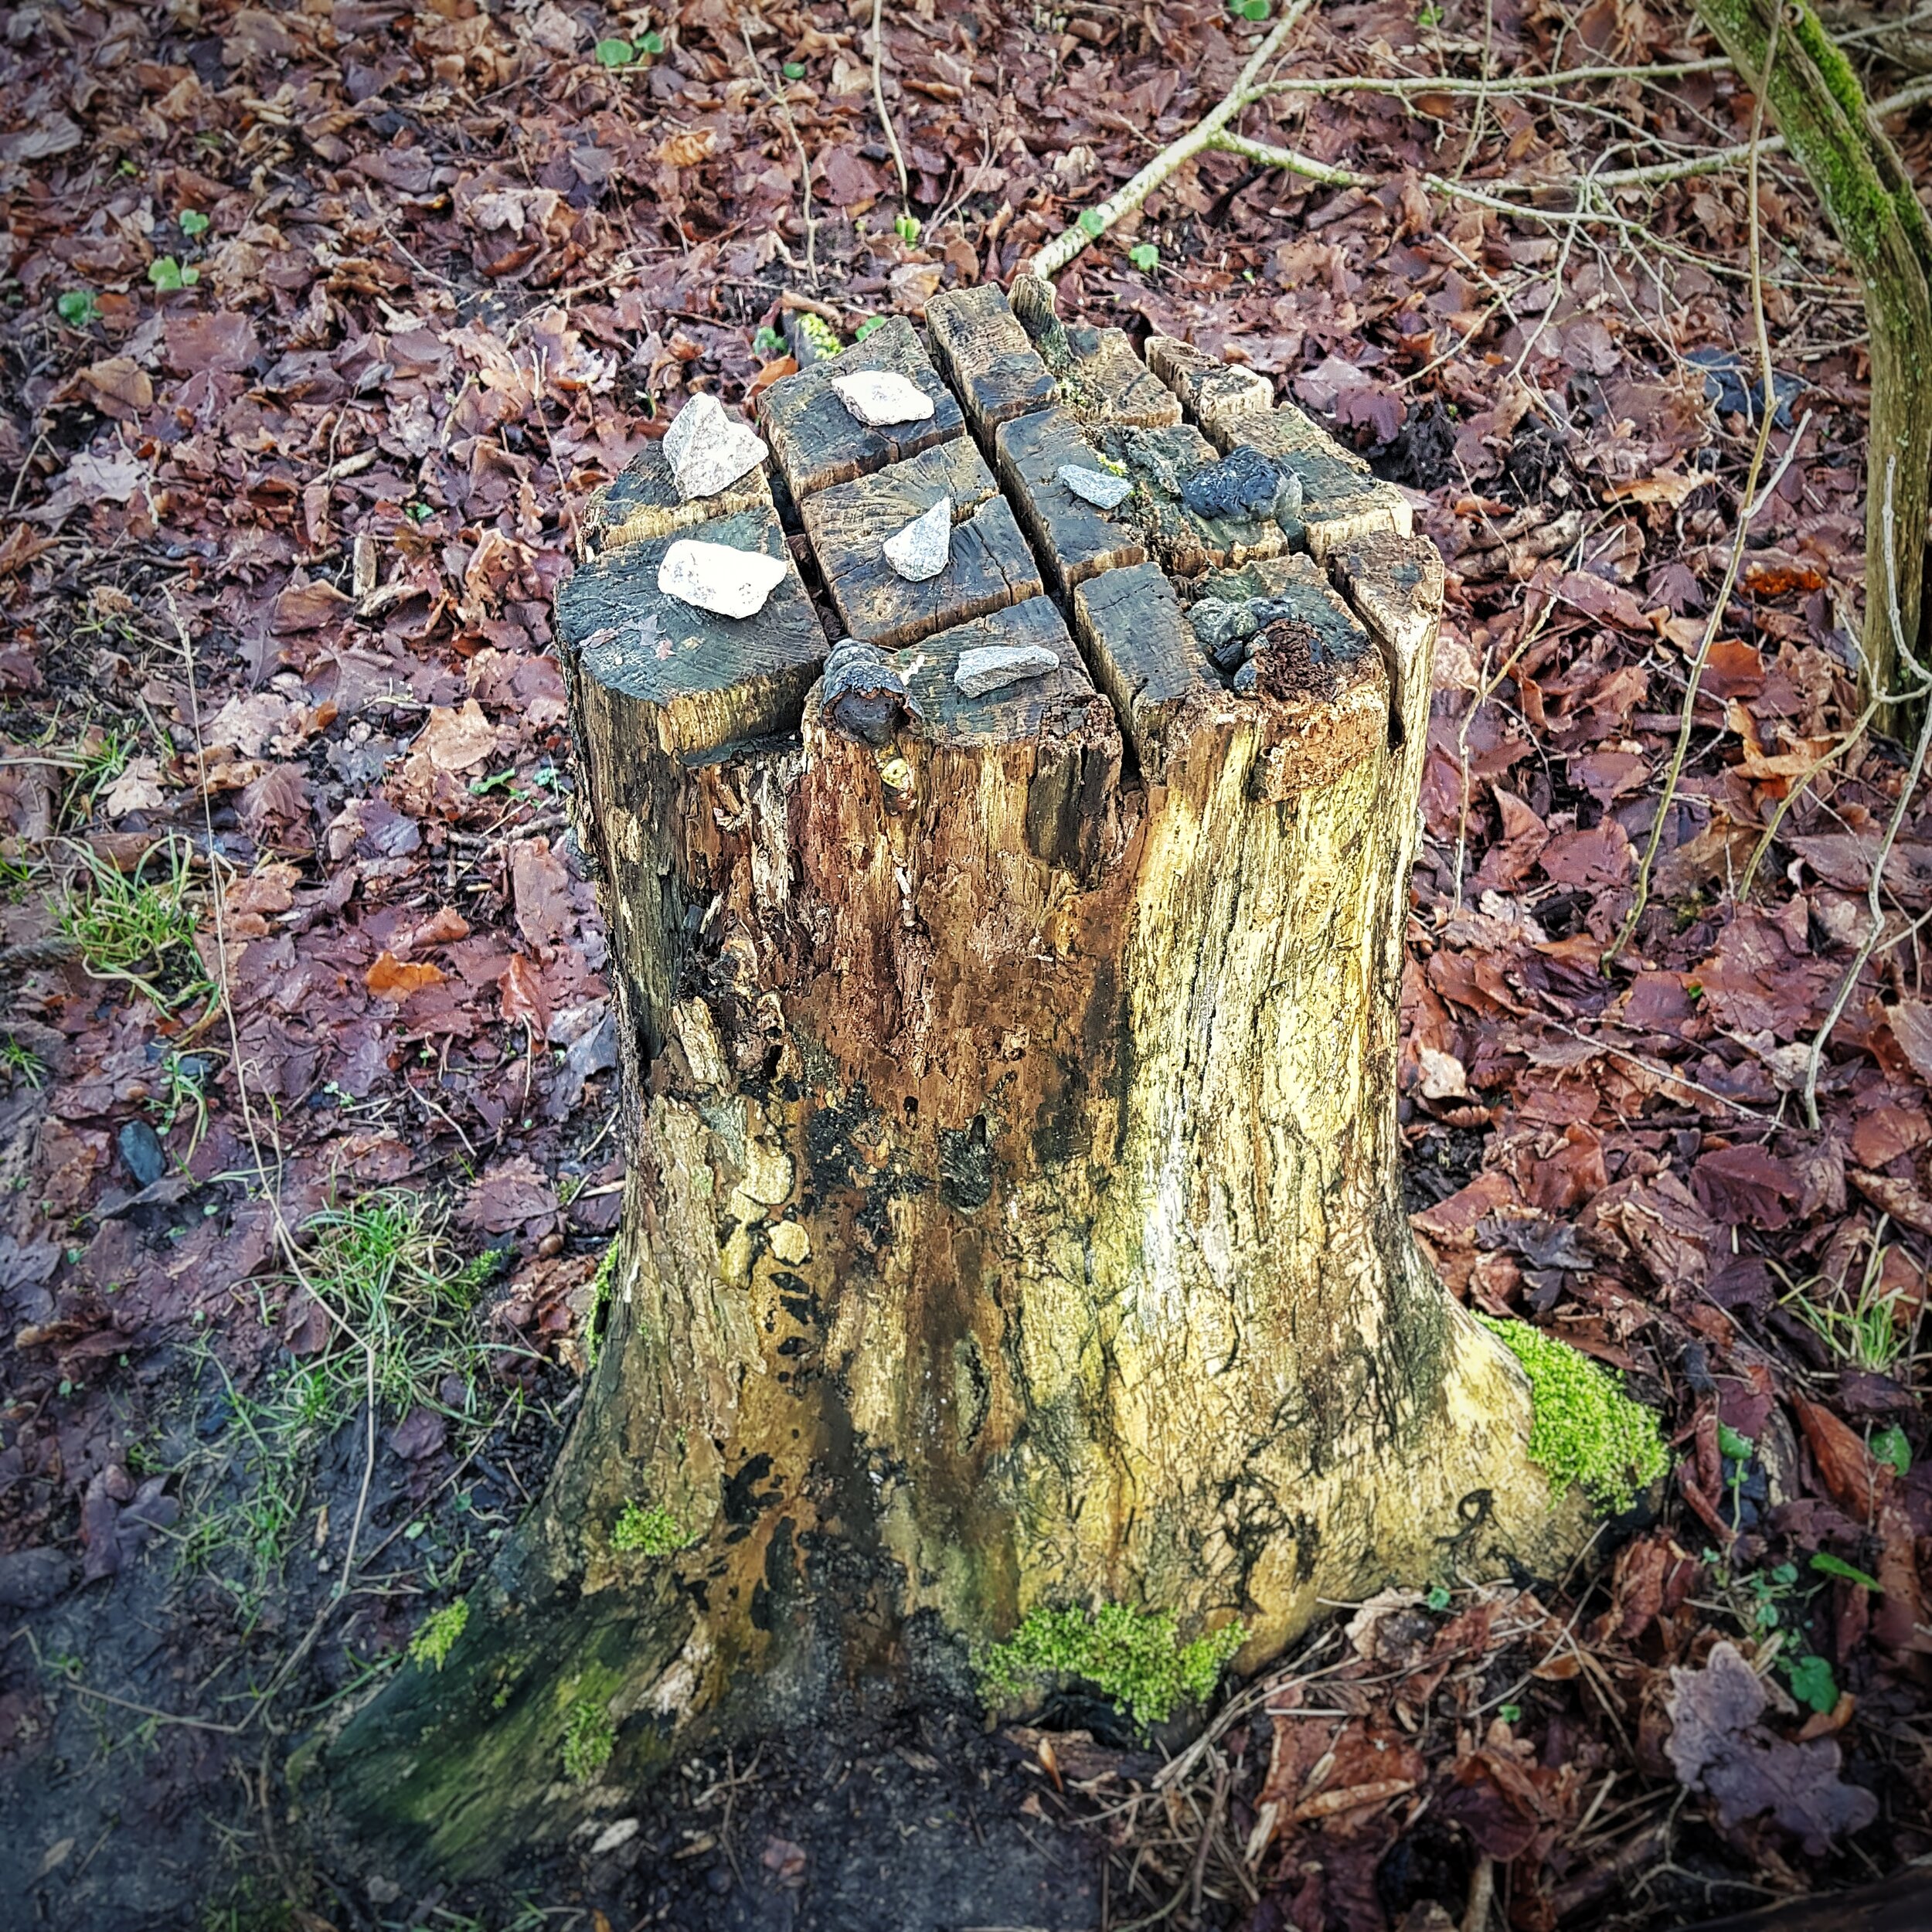 Day 18 - January 18: Tic-tac-toe in the woods